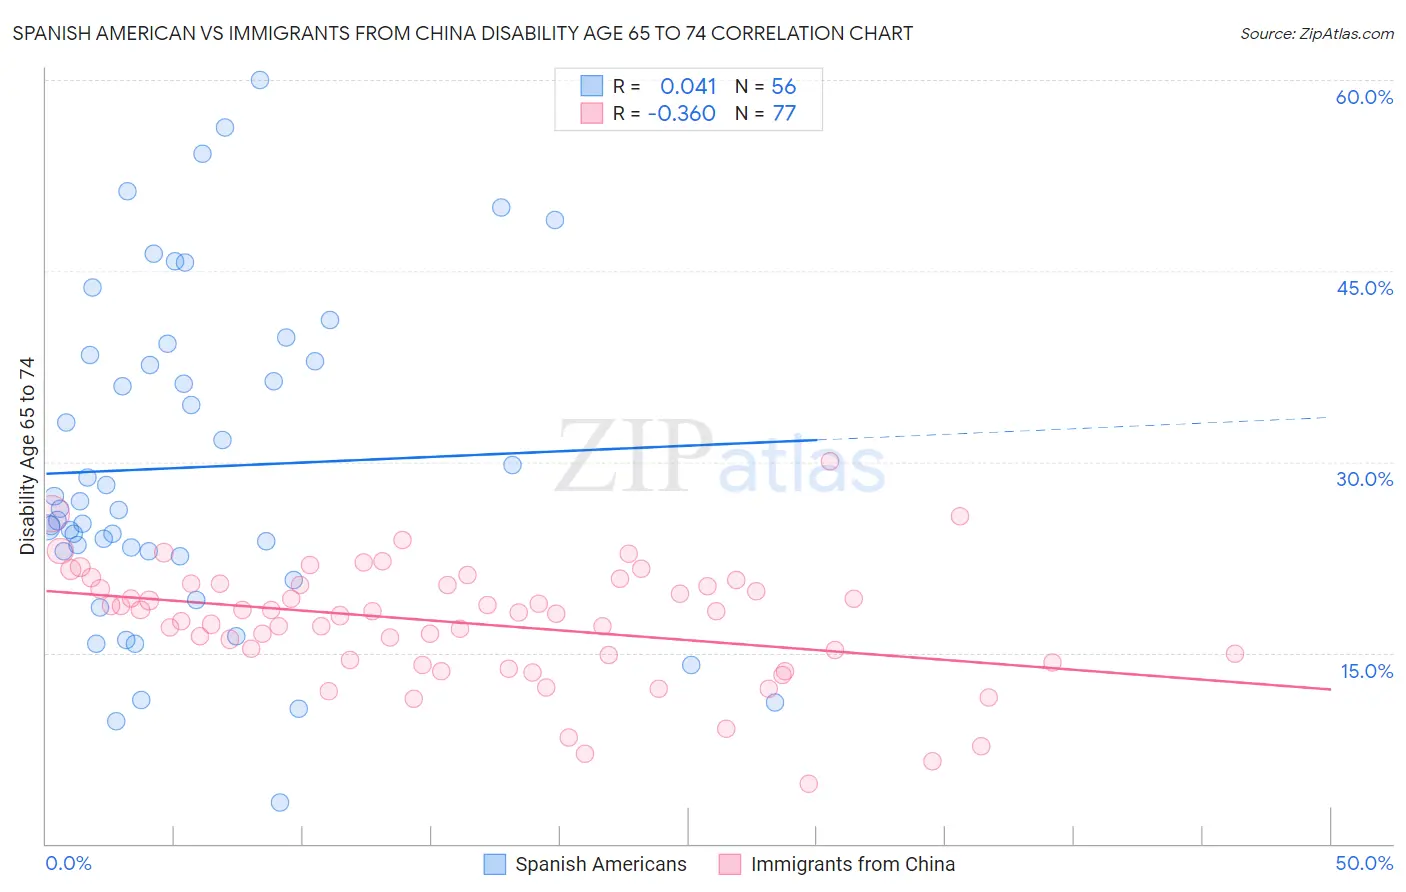 Spanish American vs Immigrants from China Disability Age 65 to 74